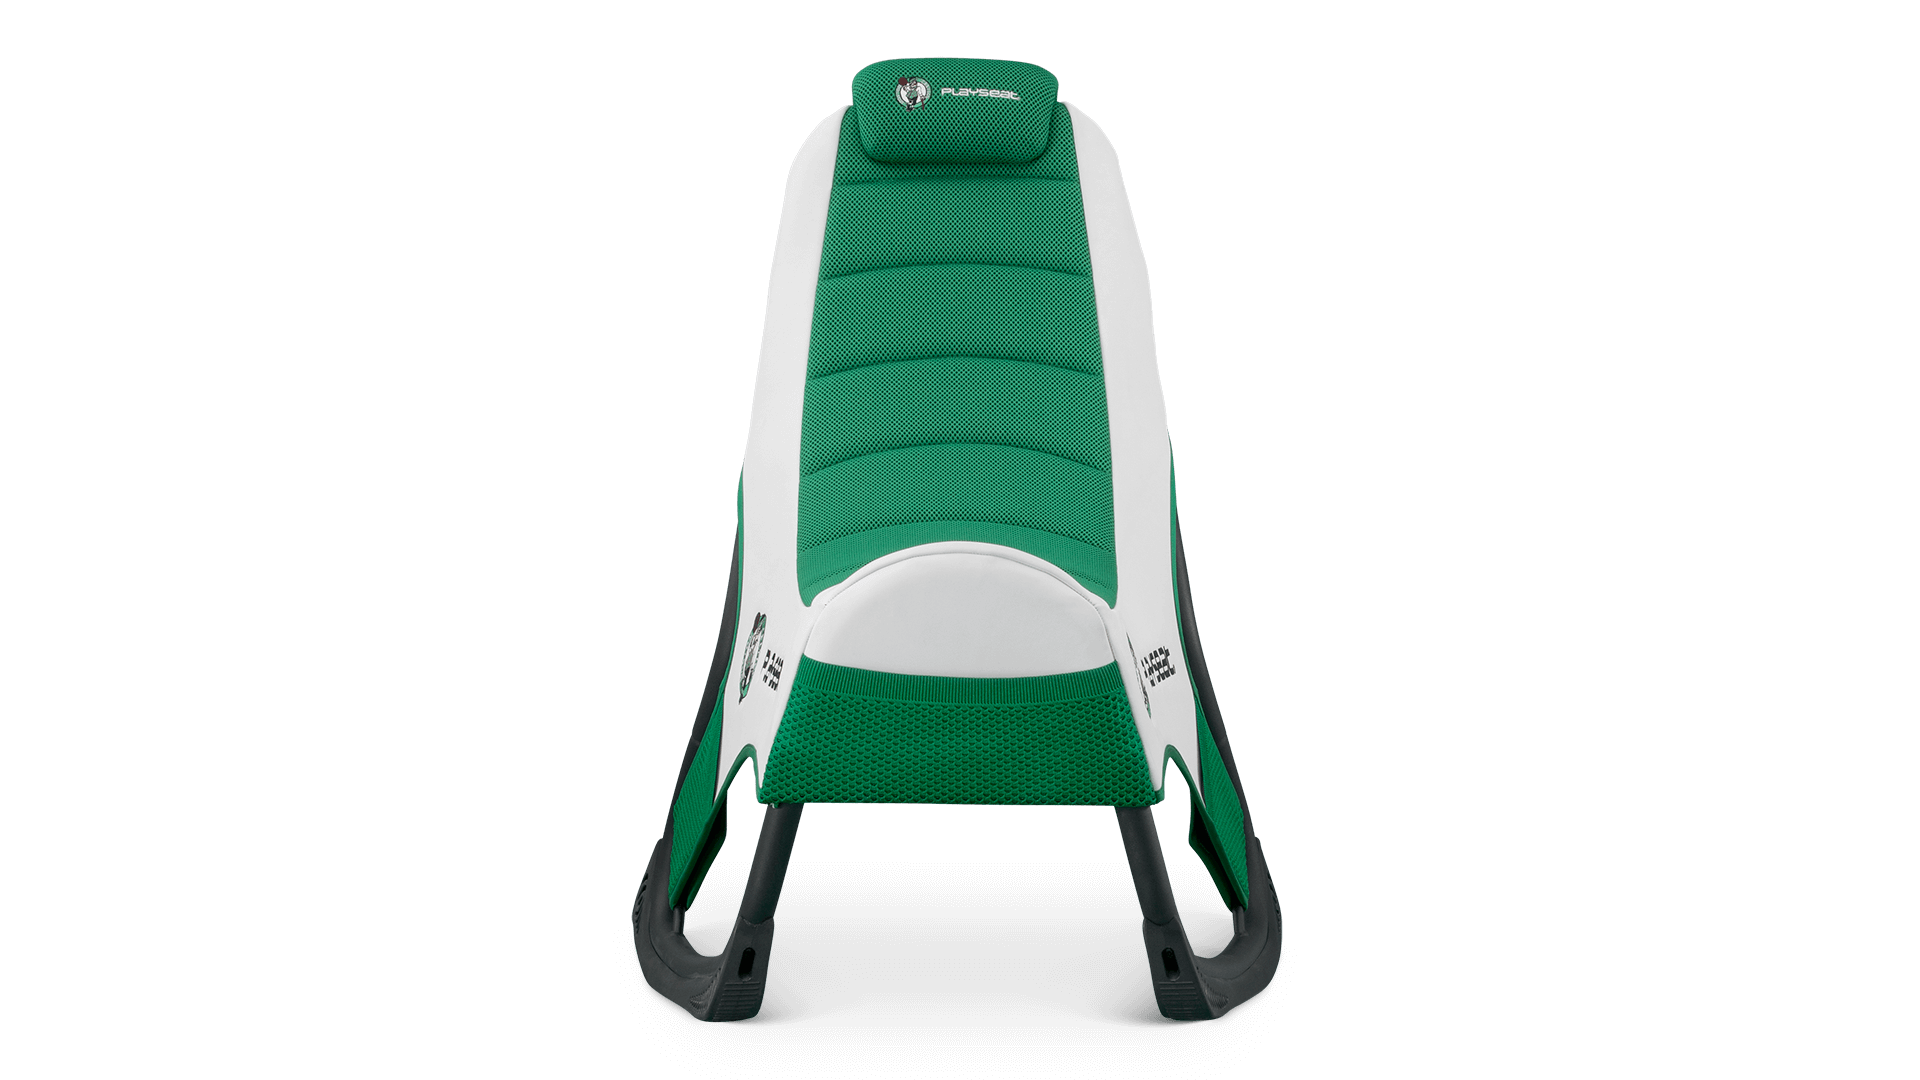 playseat-go-nba-boston-celtics-gaming-seat-front-view-1920x1080.png